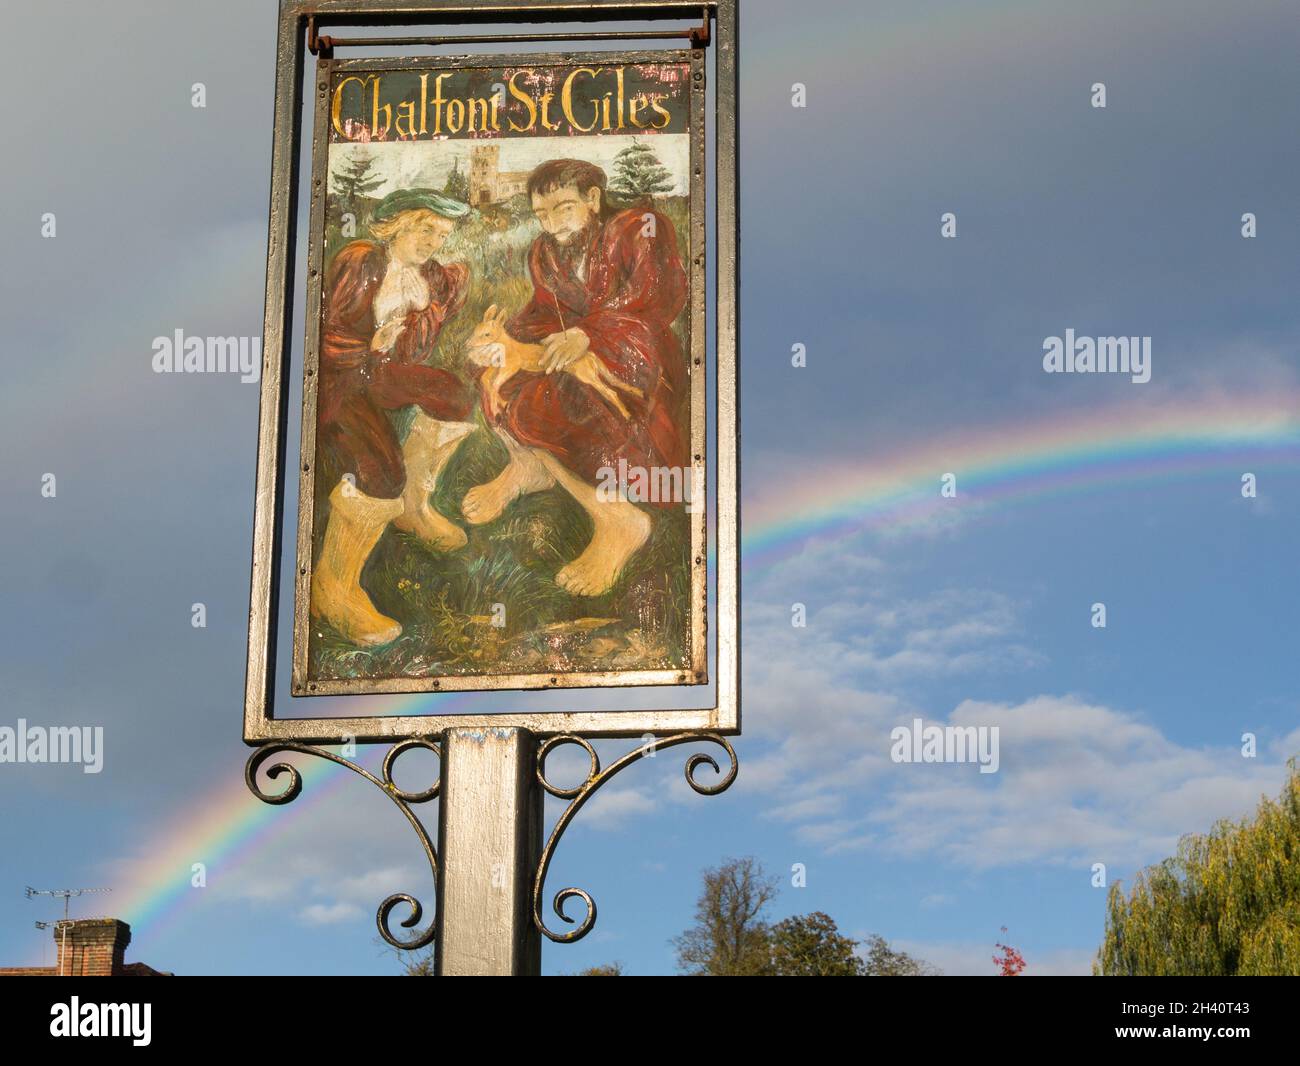 Village sign of Chalfont St Giles Buckinghamshire England UK one of the Chalfonts villages rainbow in sky behind sign Stock Photo